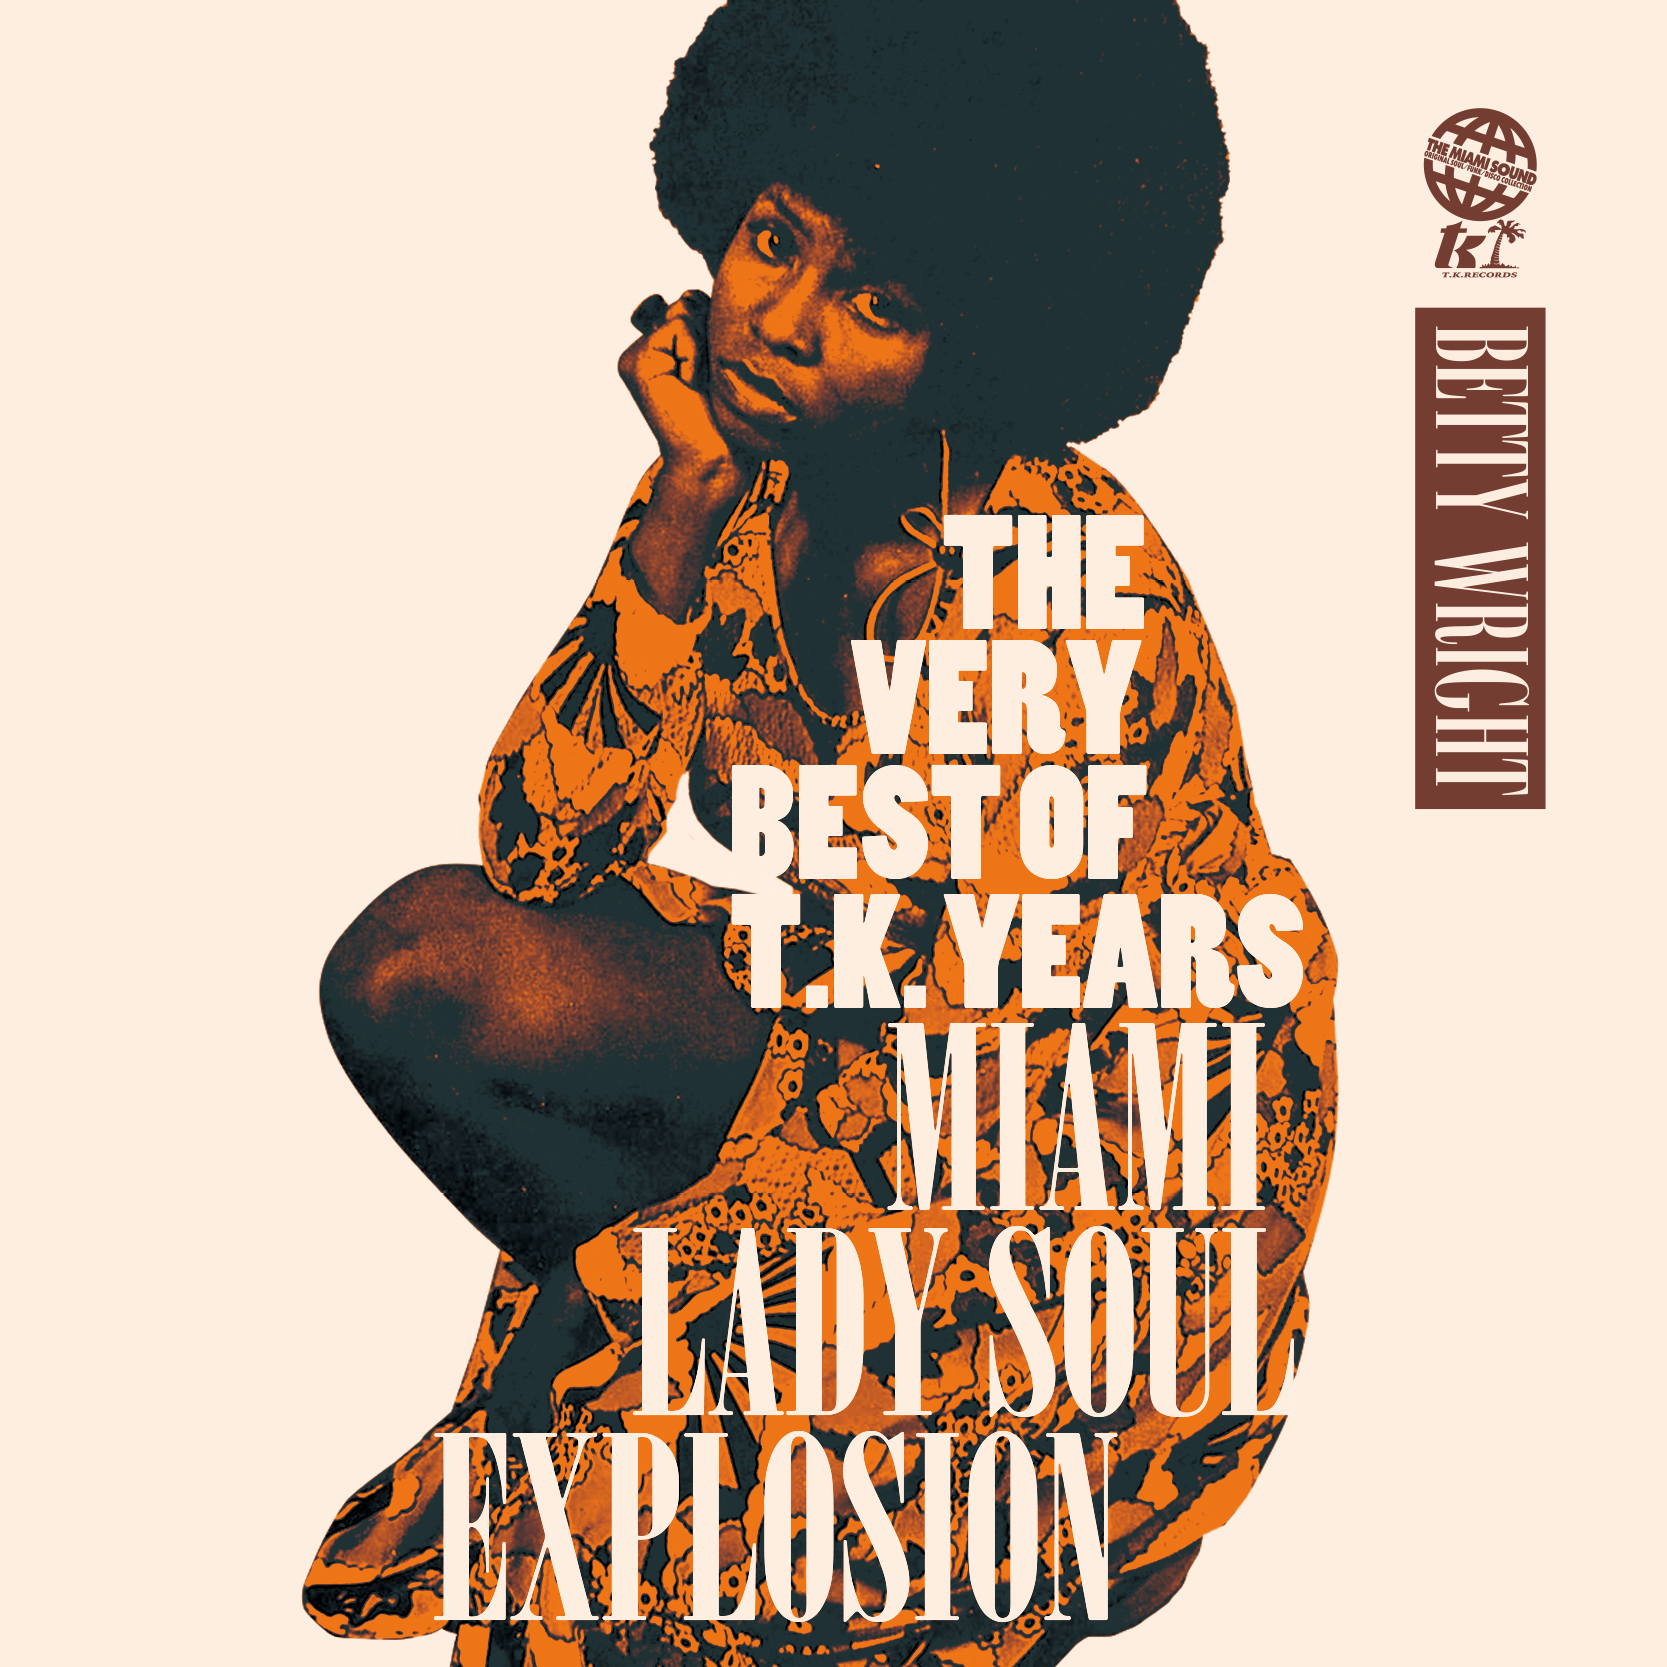 THE VERY BEST OF T.K. YEARS -MIAMI LADY SOUL EXPLOSION-